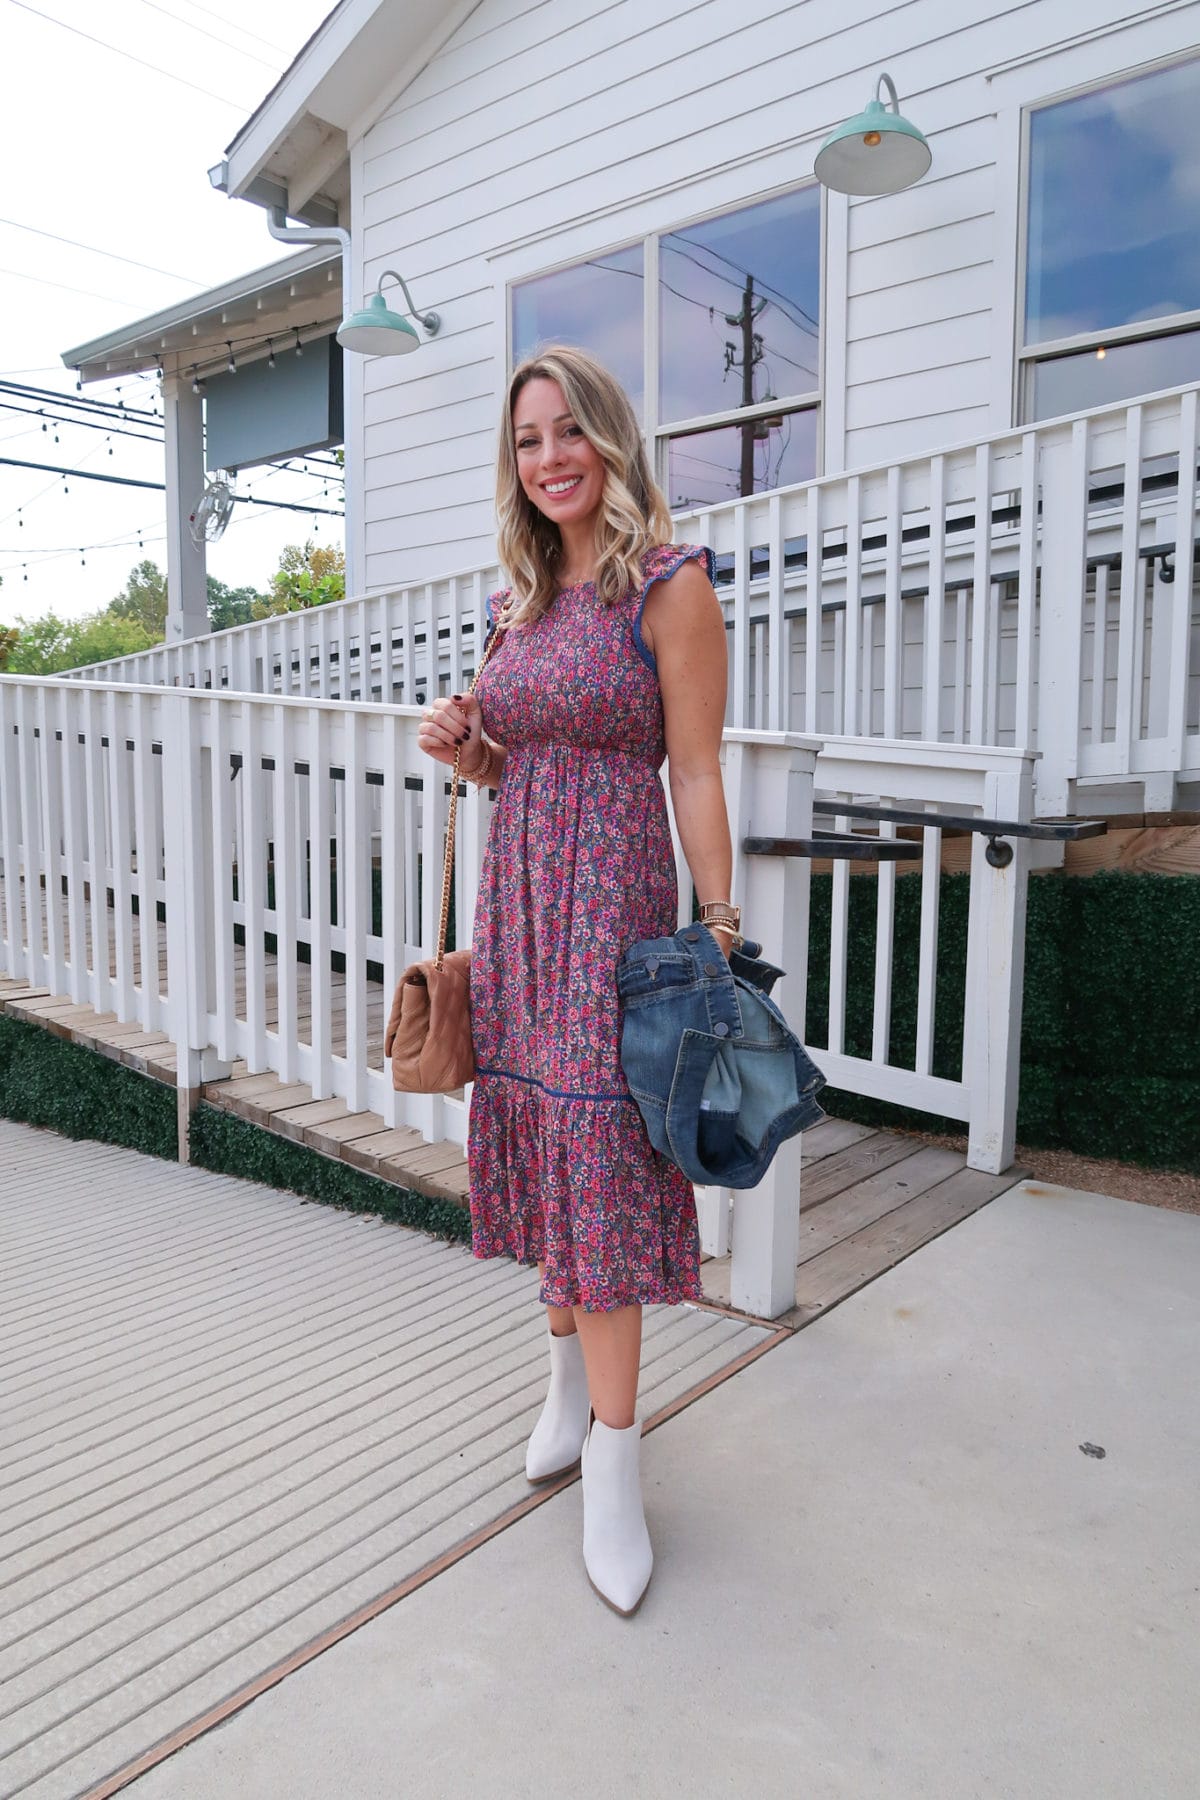 Outfits Lately, Floral Smocked Top Dress, Booties, Denim Jacket, Crossbody Bag